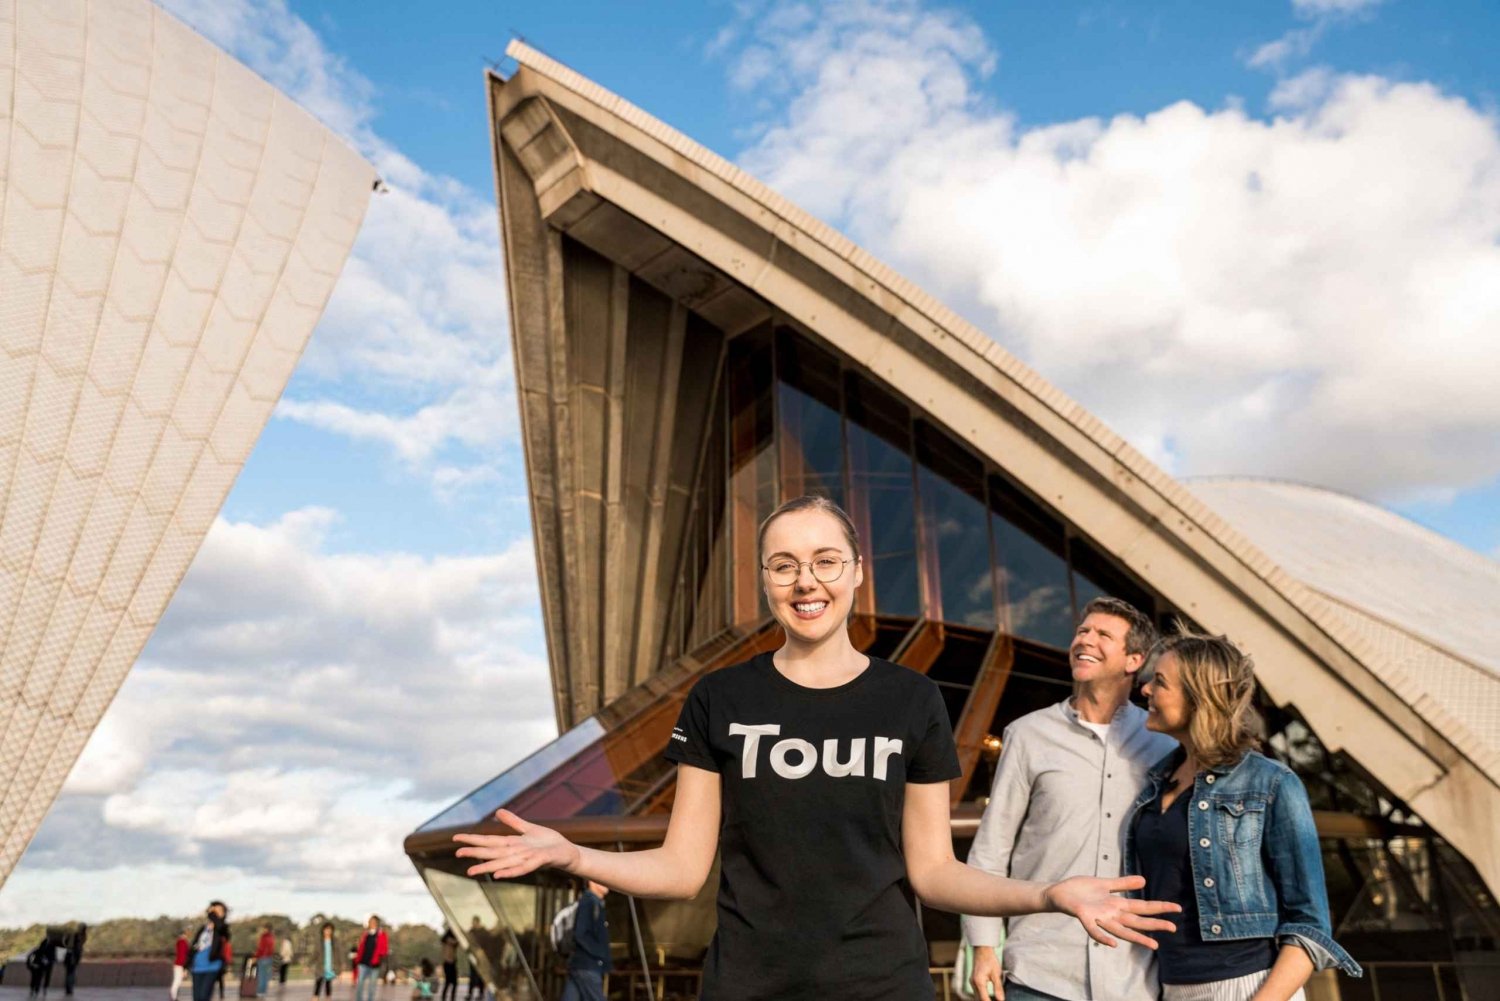 Sydney: Opera House Guided Tour with Entrance Ticket